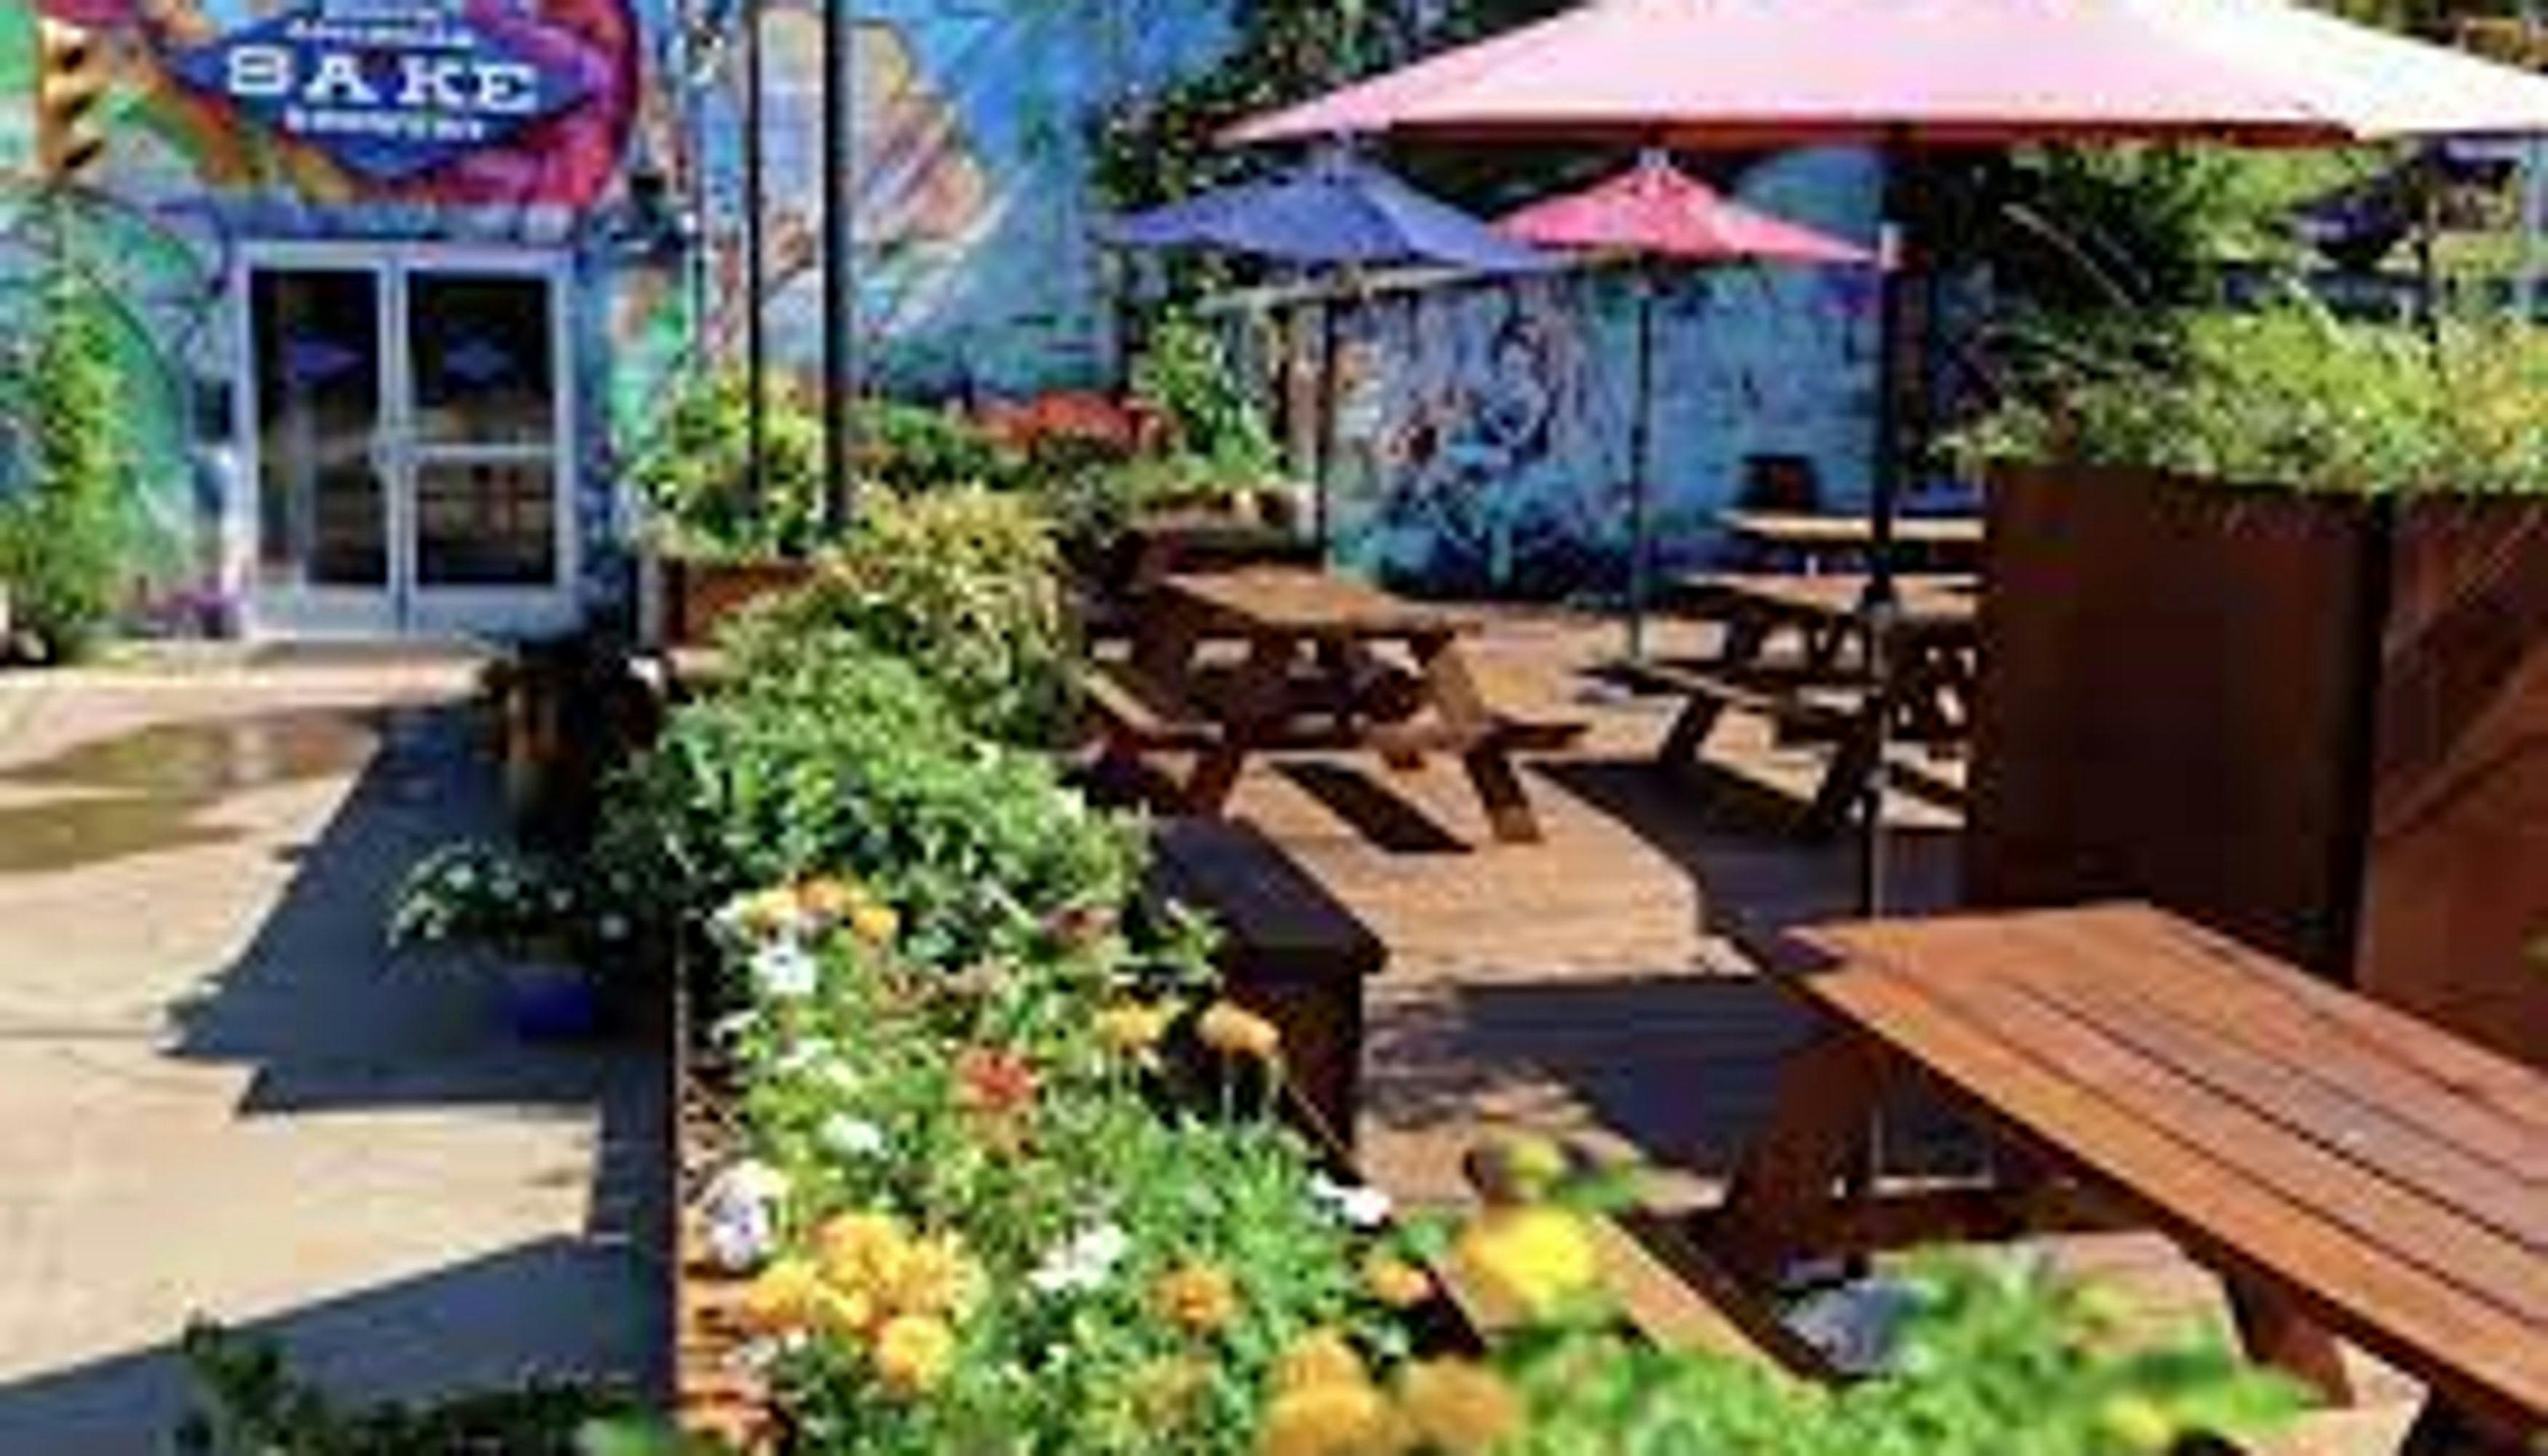 Located at IX Art Park with an outdoor patio